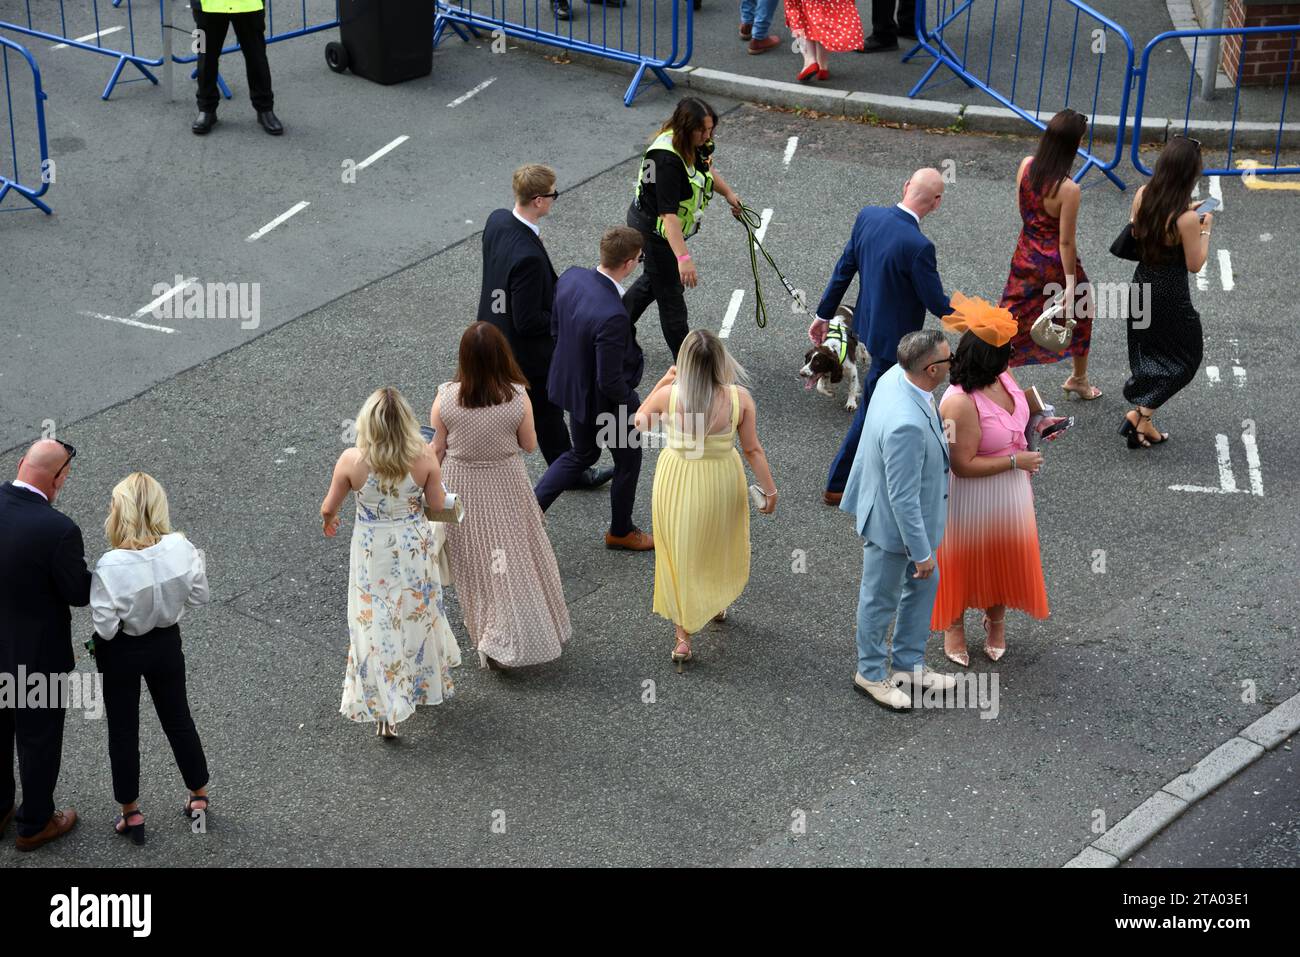 Couples & Women or Female Race Goers wearing Fancy, Fashionable or Colourful Dresses During Ladies Day at Chester Races Chester Racecourse  England UK Stock Photo